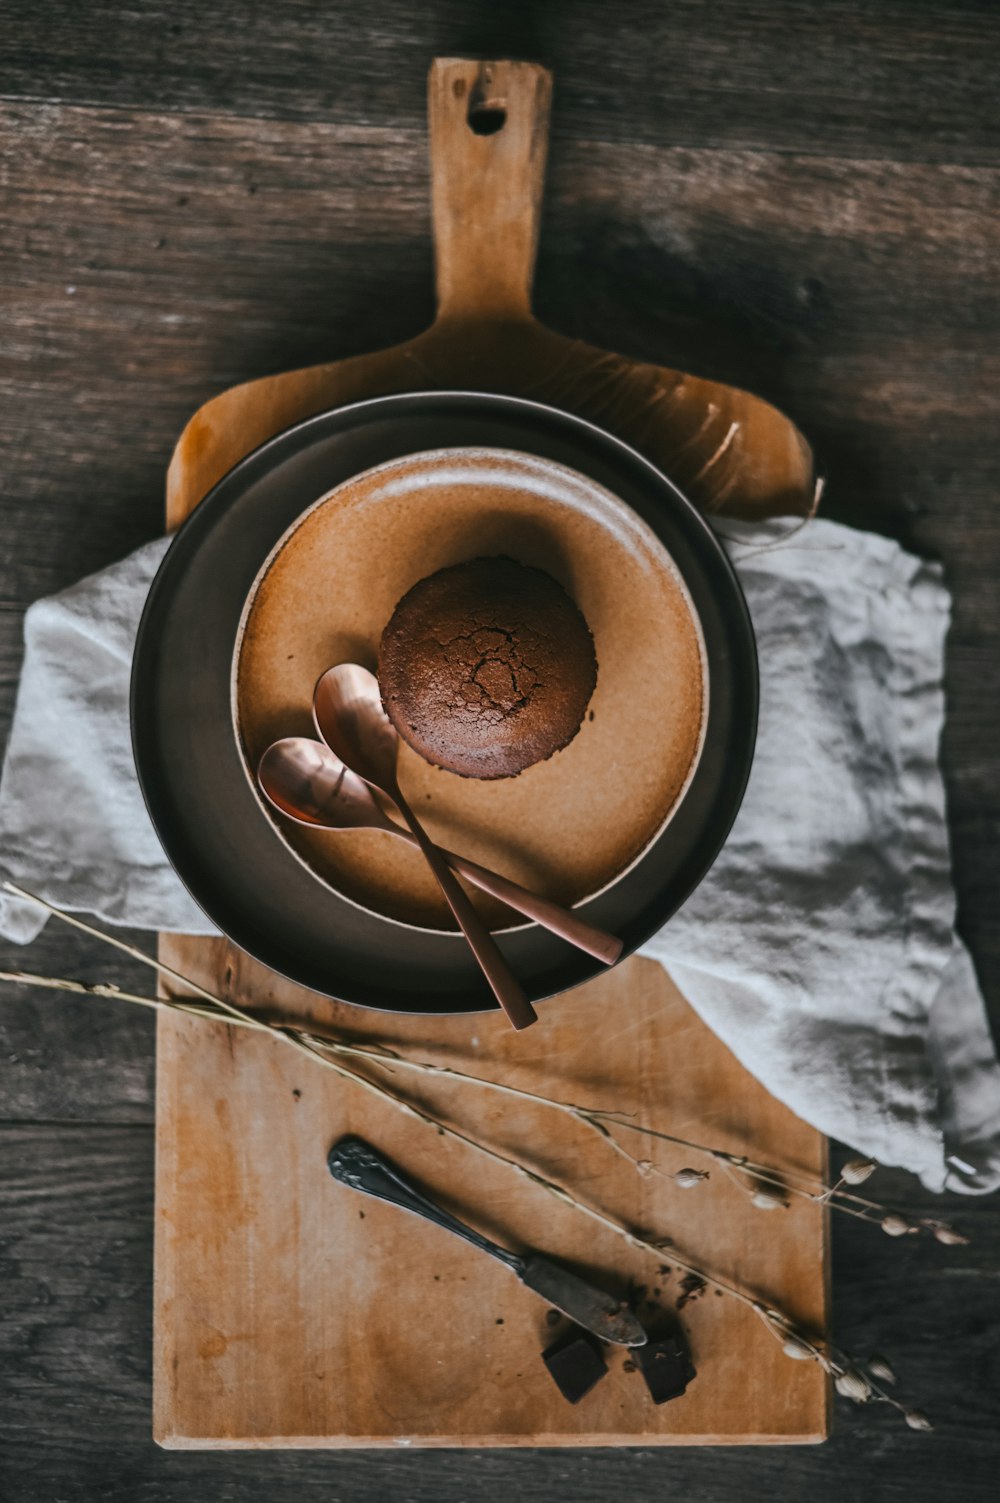 brown wooden ladle on brown round bowl